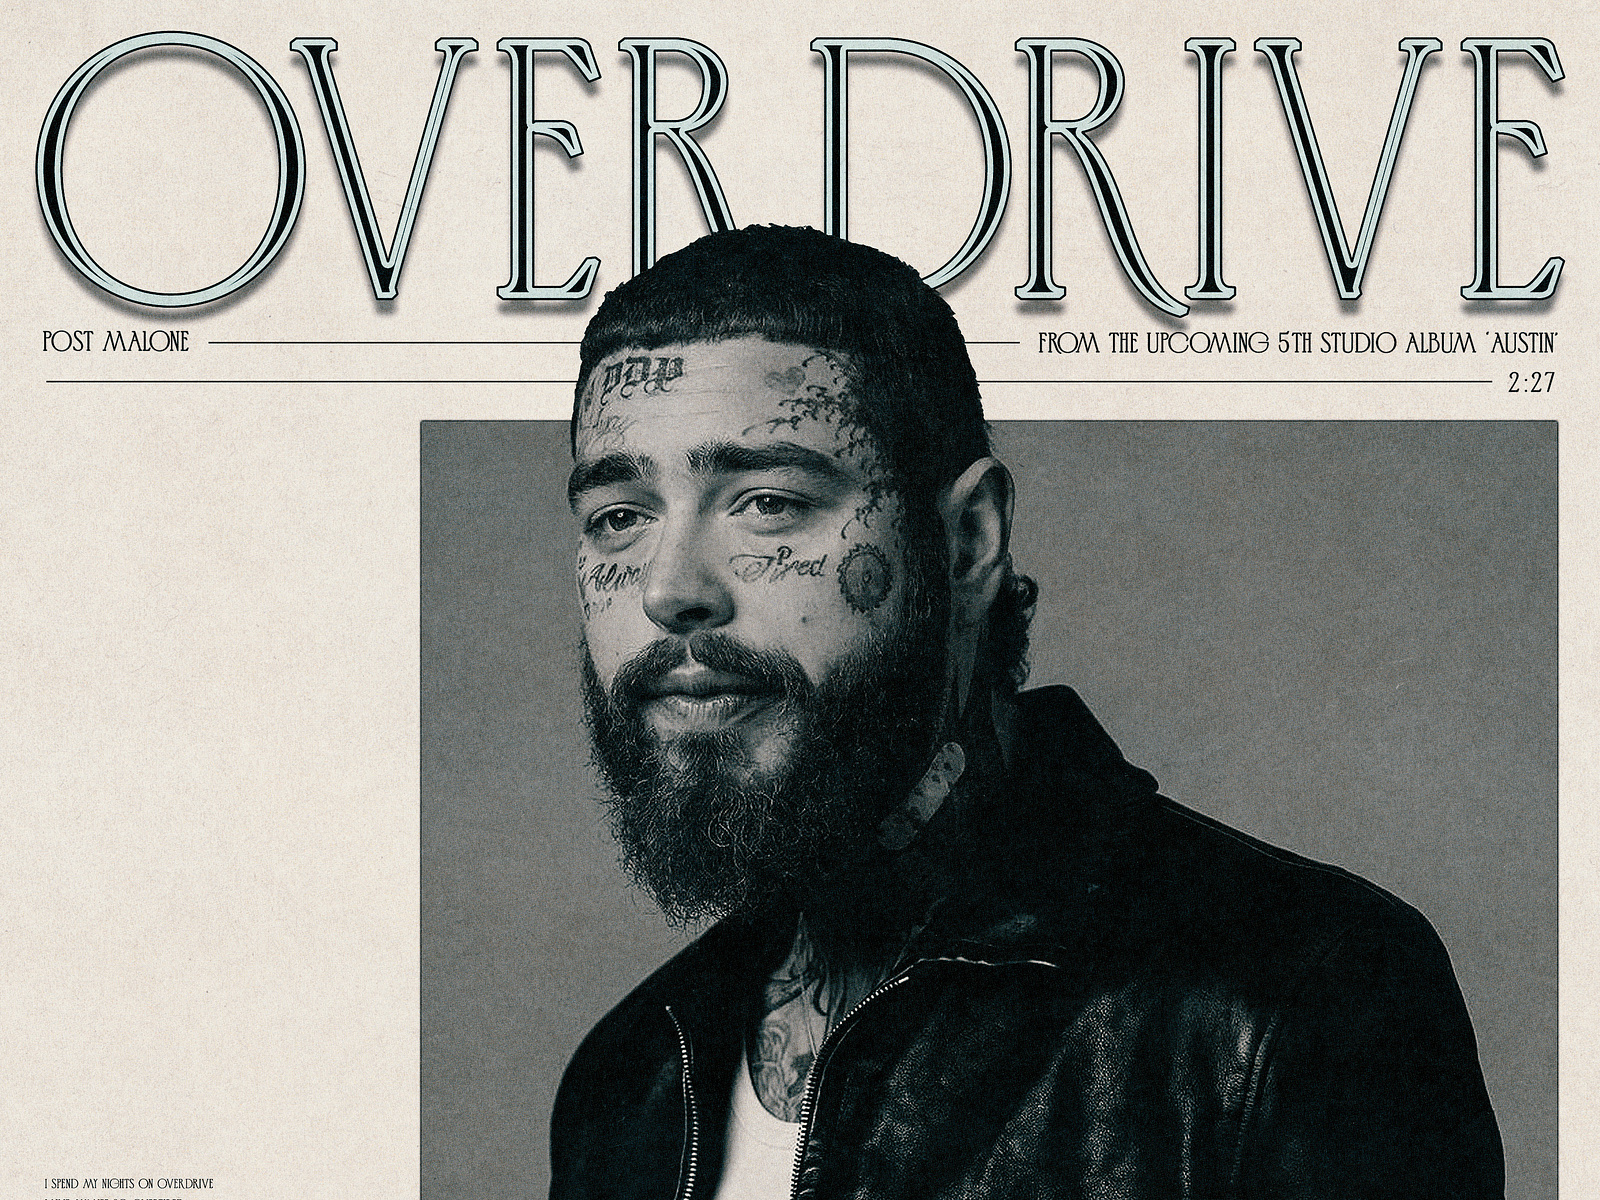 Post Malone - Overdrive (Concept Cover Art) by Bandicoot Design on Dribbble